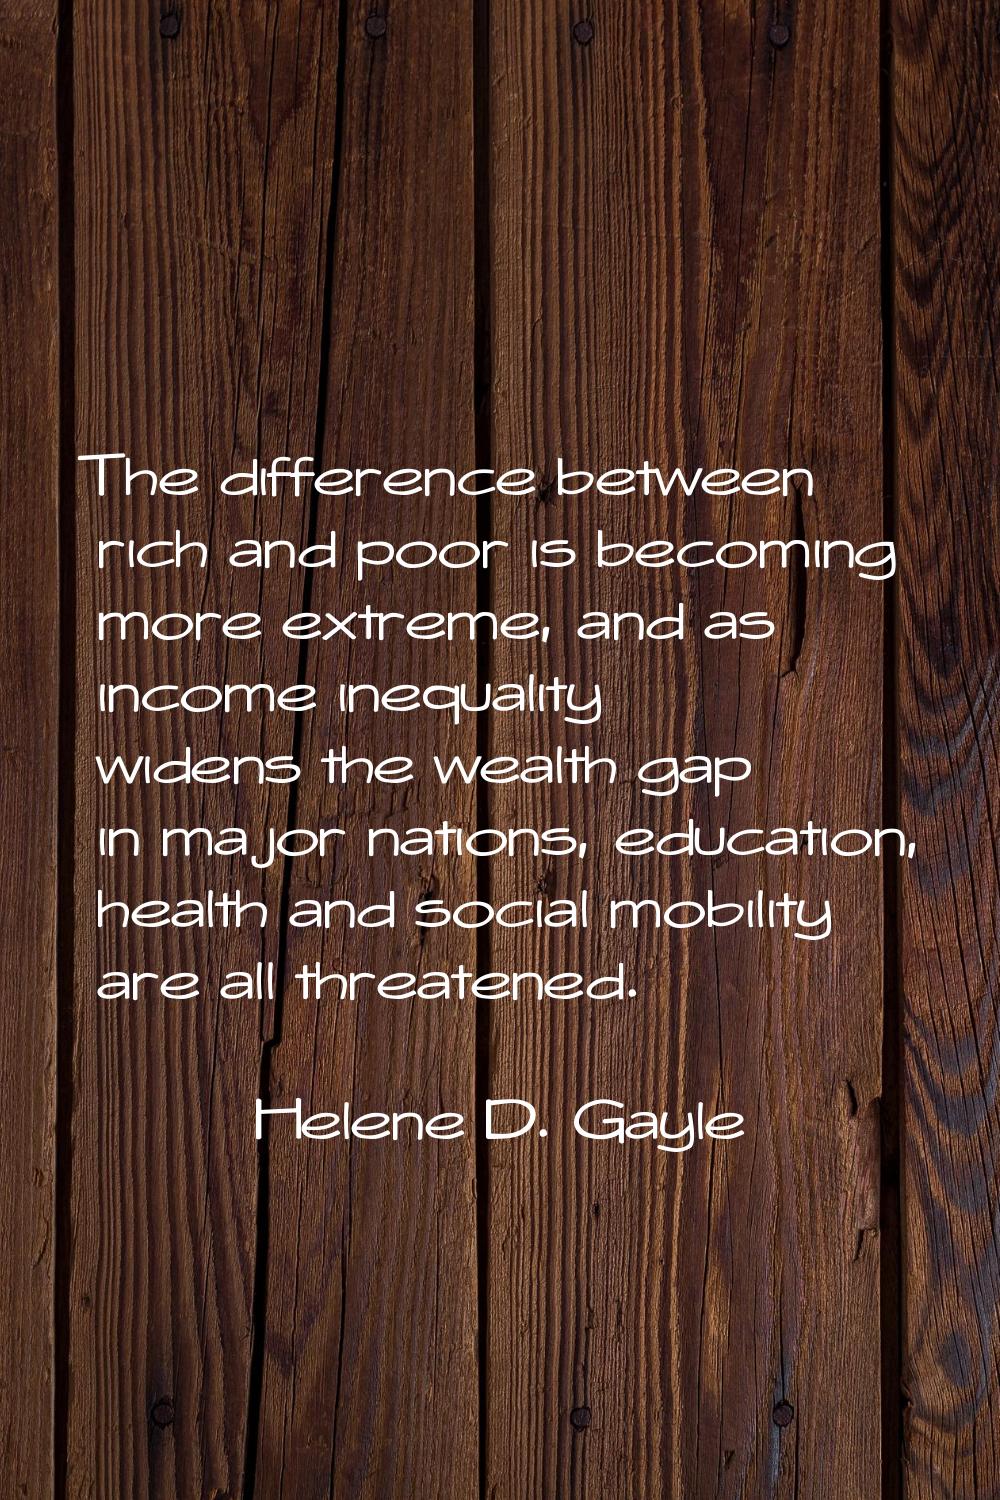 The difference between rich and poor is becoming more extreme, and as income inequality widens the 